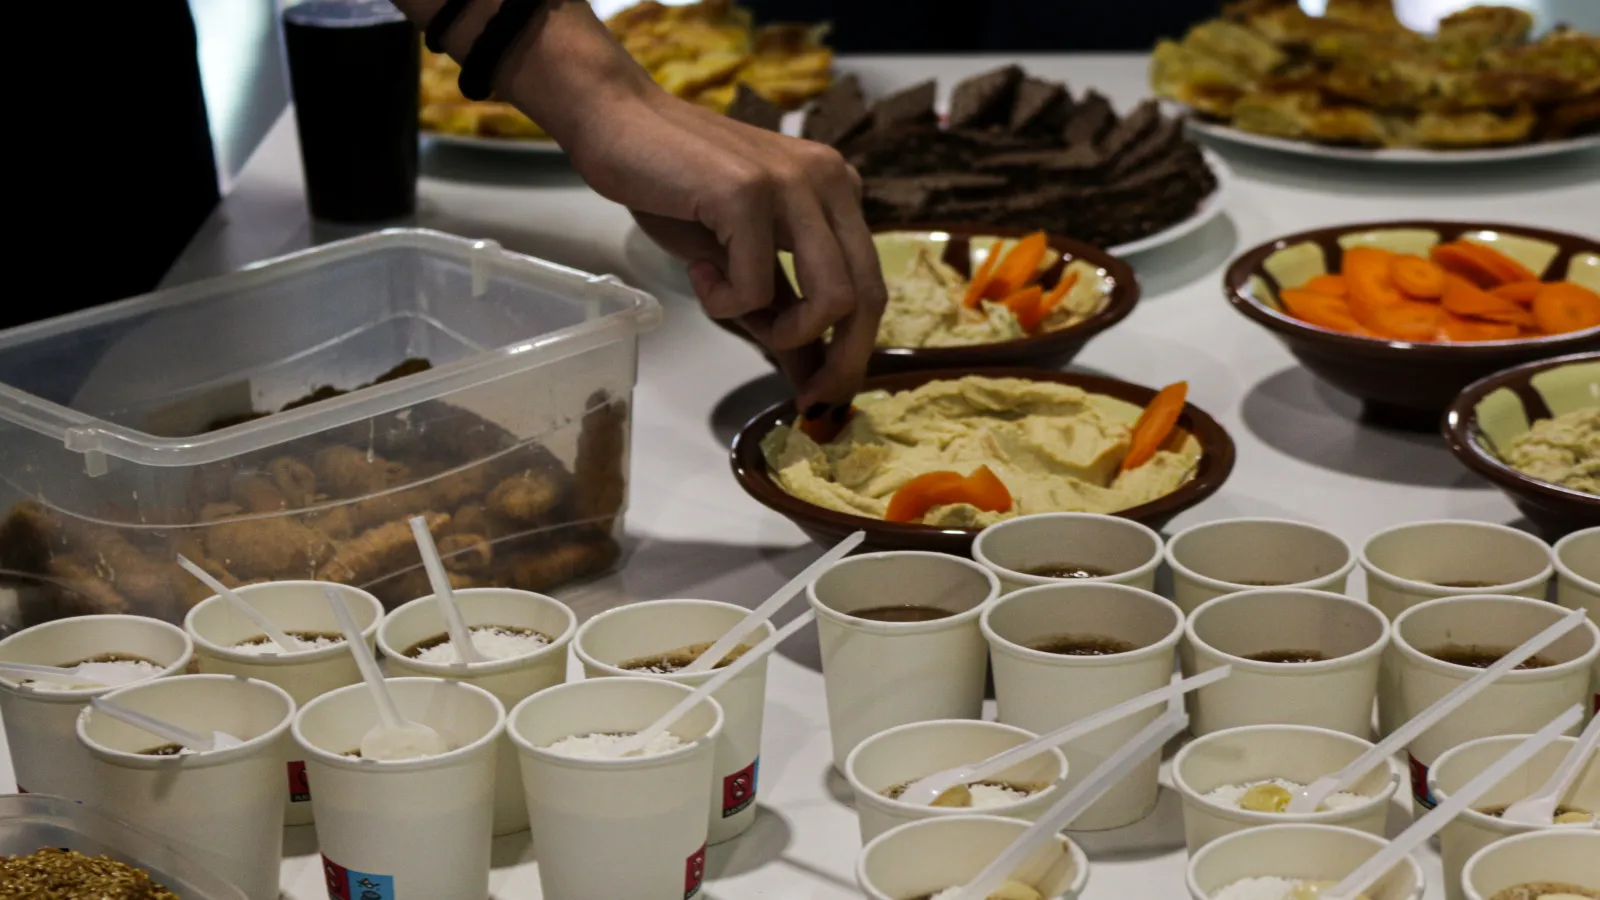 Hummus and different foods for different nations, distributed in cups for self-service